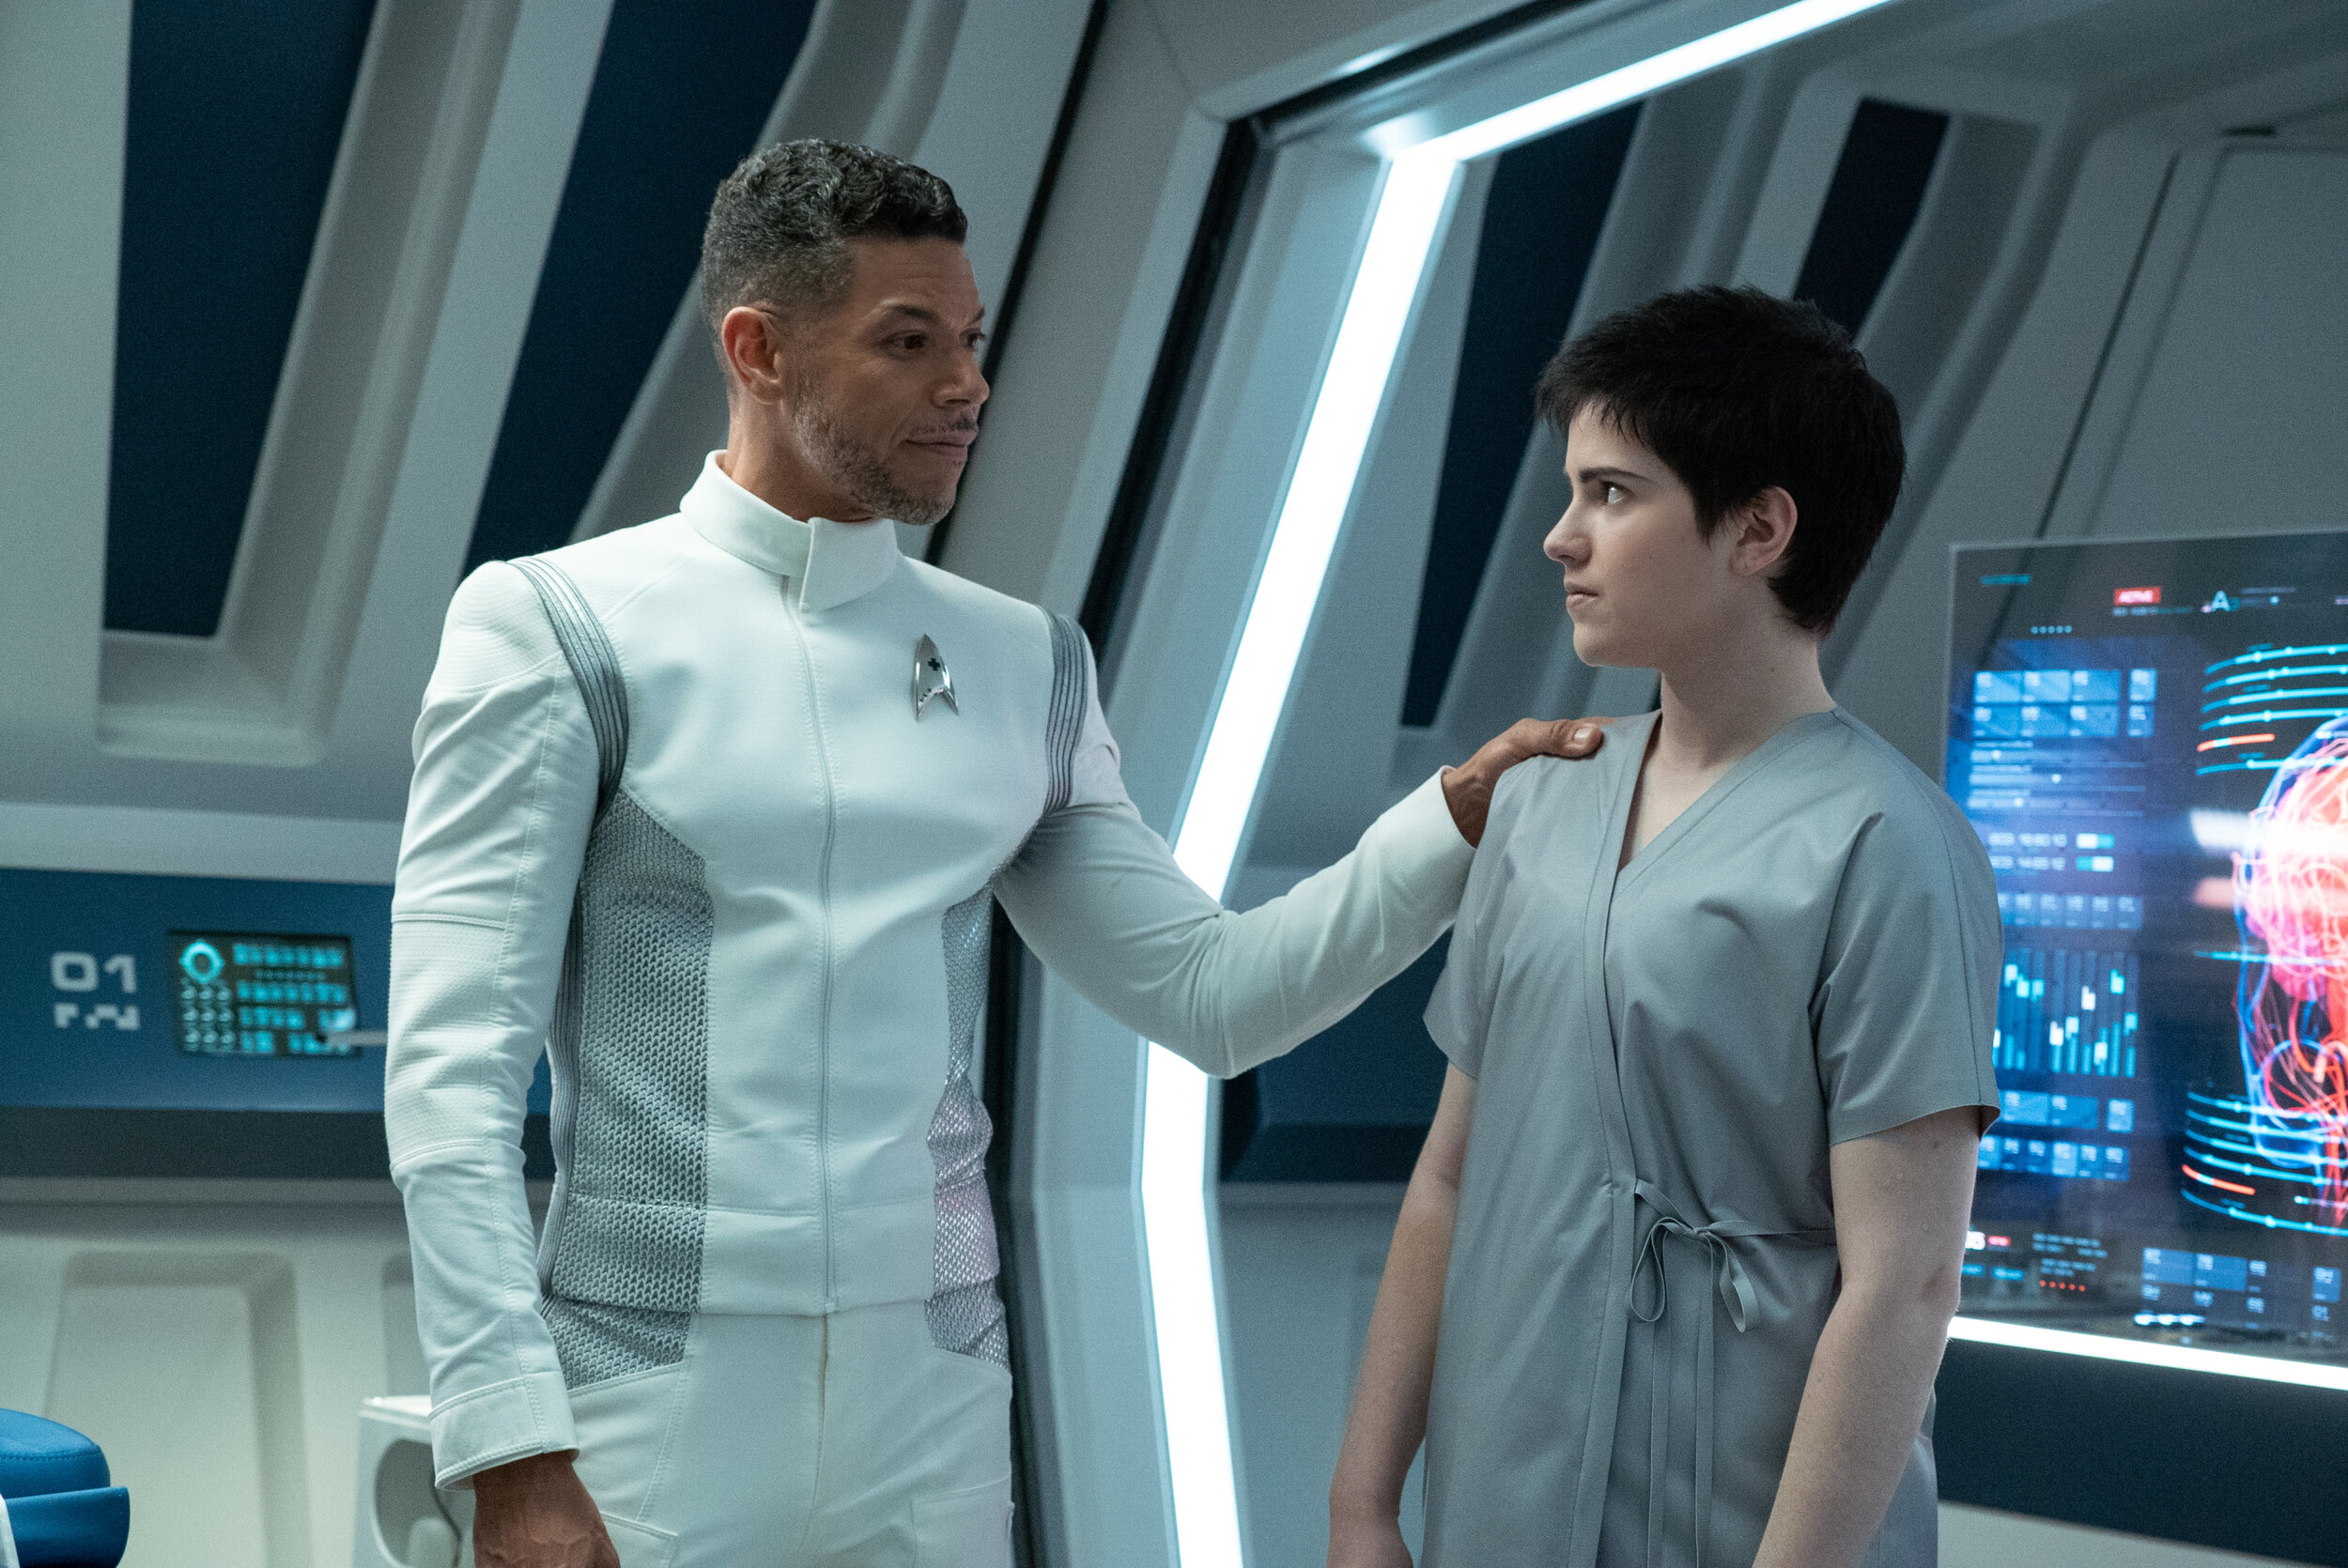   "Forget Me Not" -- Ep#304 -- Pictured: Wilson Cruz as Dr. Hugh Culber and Blu del Barrio as Adira of the CBS All Access series STAR TREK: DISCOVERY. Photo Cr: Michael Gibson/CBS ©2020 CBS Interactive, Inc. All Rights Reserved.  